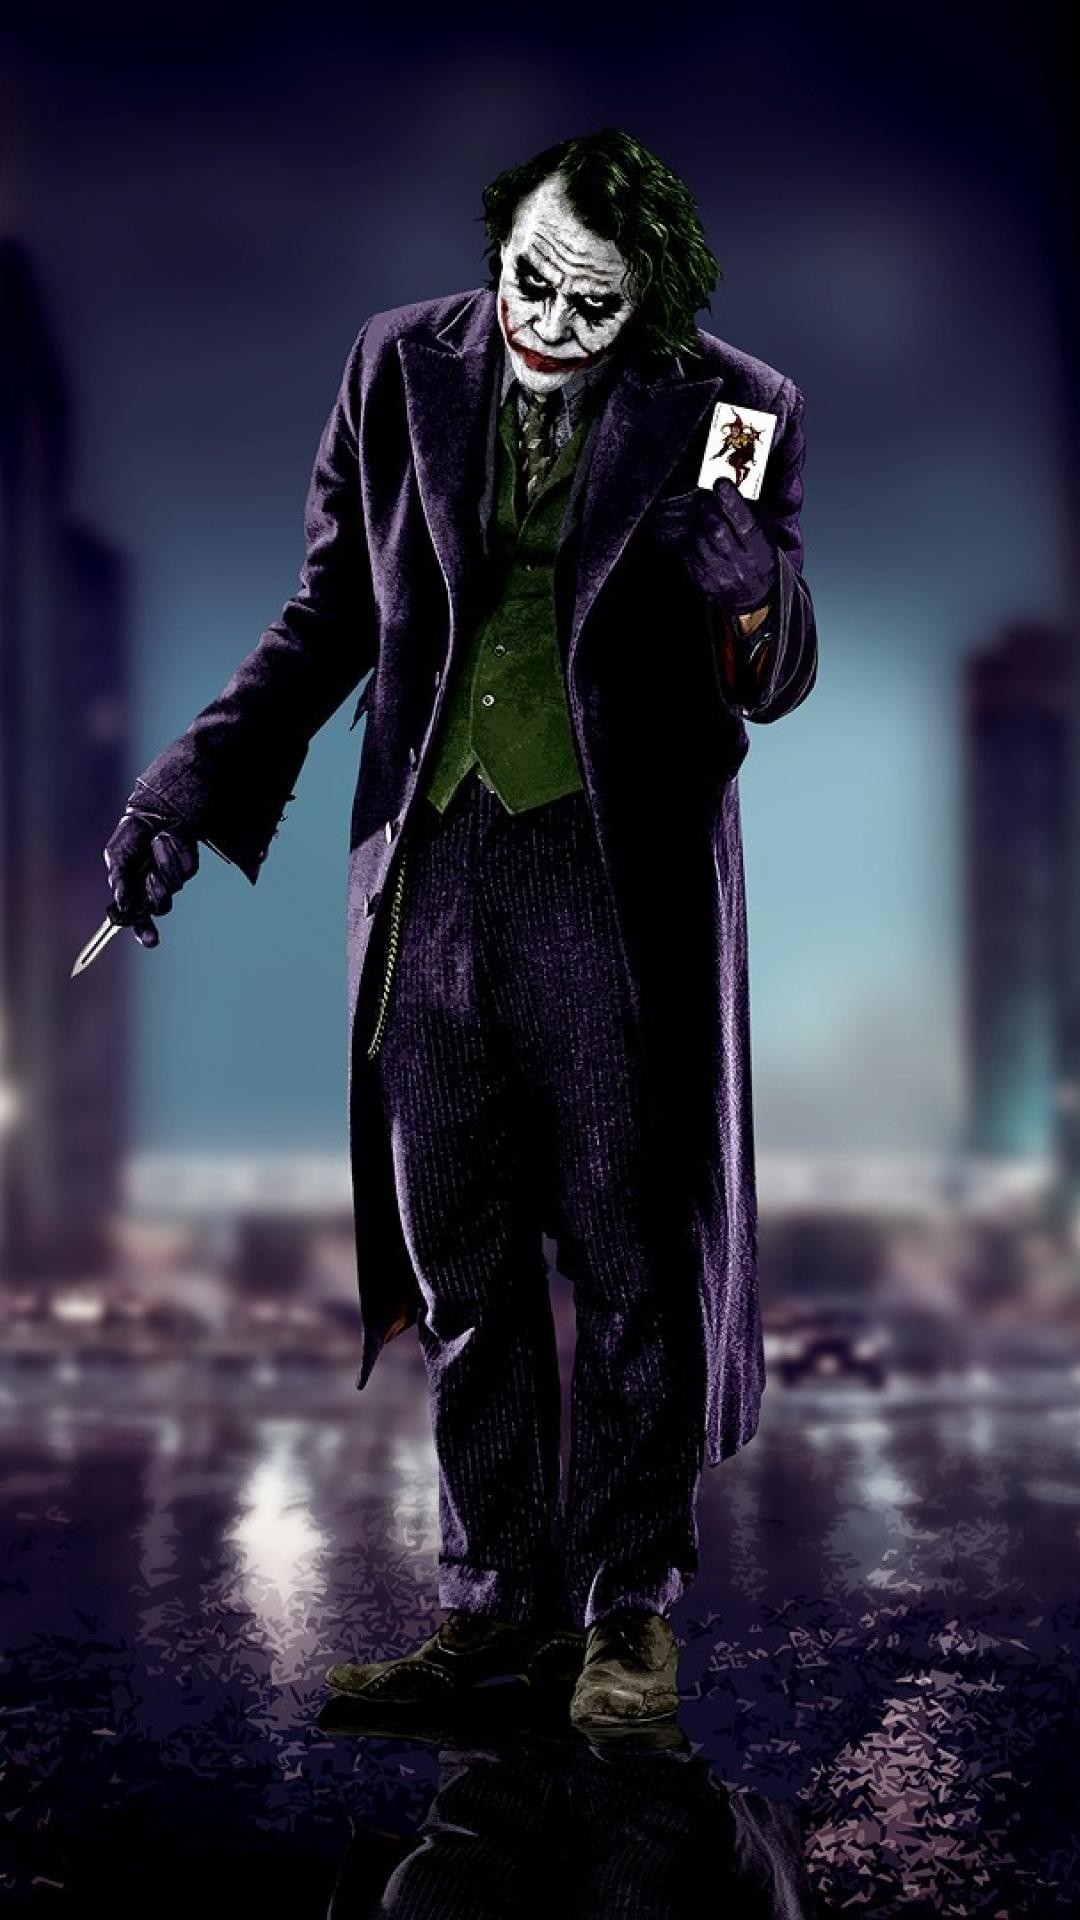 1080x1920 1920x1080 Suicide Squad: New Images Of Jared Leto's Joker From Empire  Magazine ...">